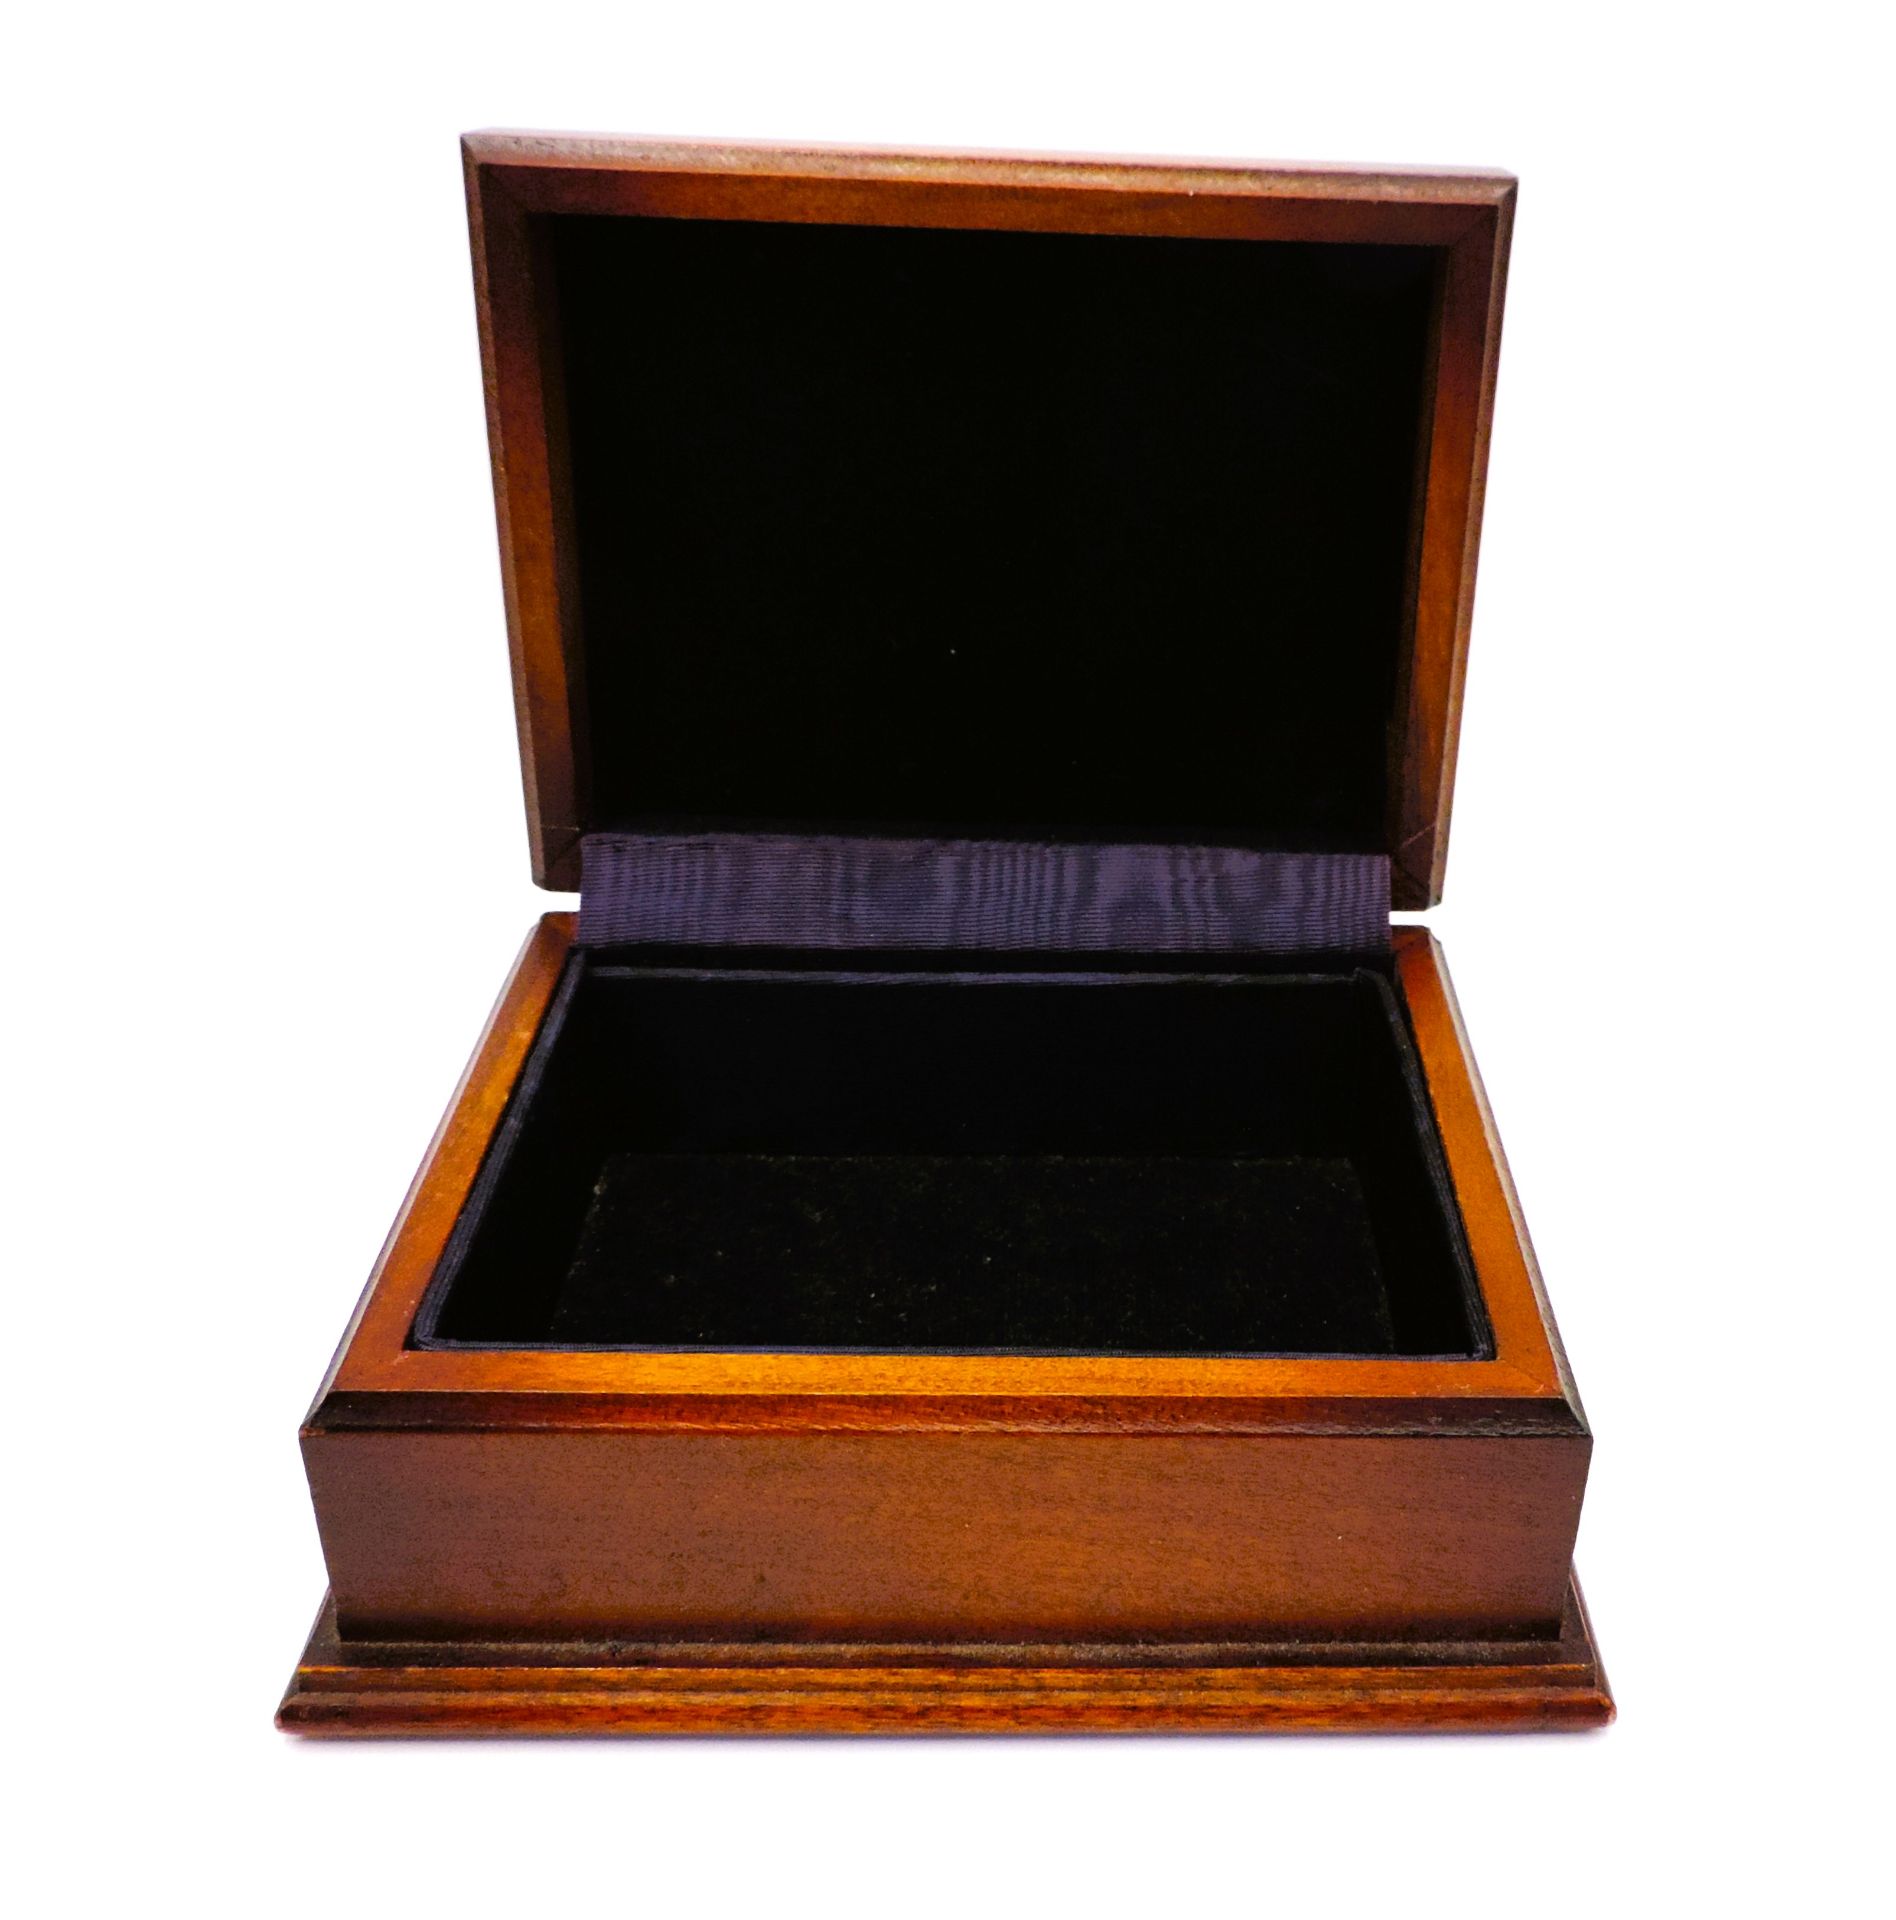 Silver Mounted Mahogany Jewellery Casket Carr's of Sheffield c.1993 - Image 4 of 7